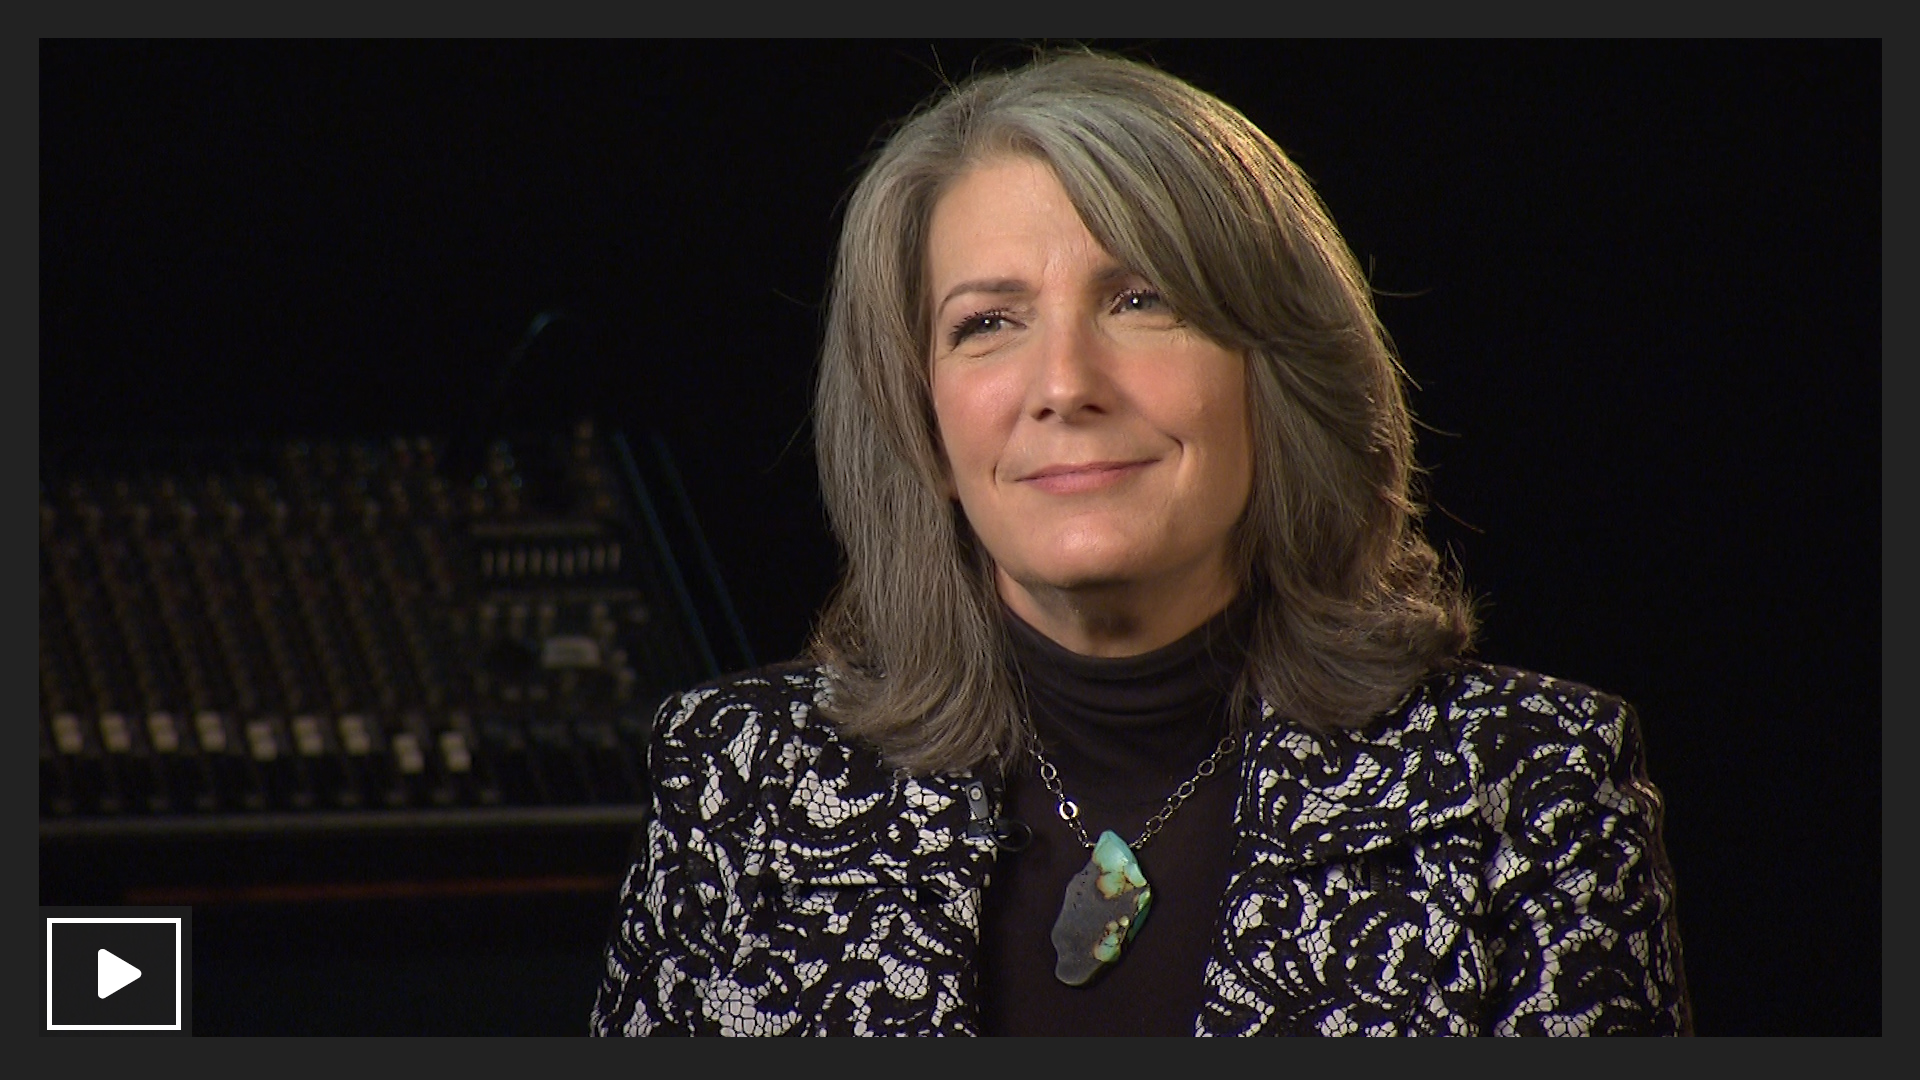 Kathy Mattea on the Echo Chamber at Jack's Tracks